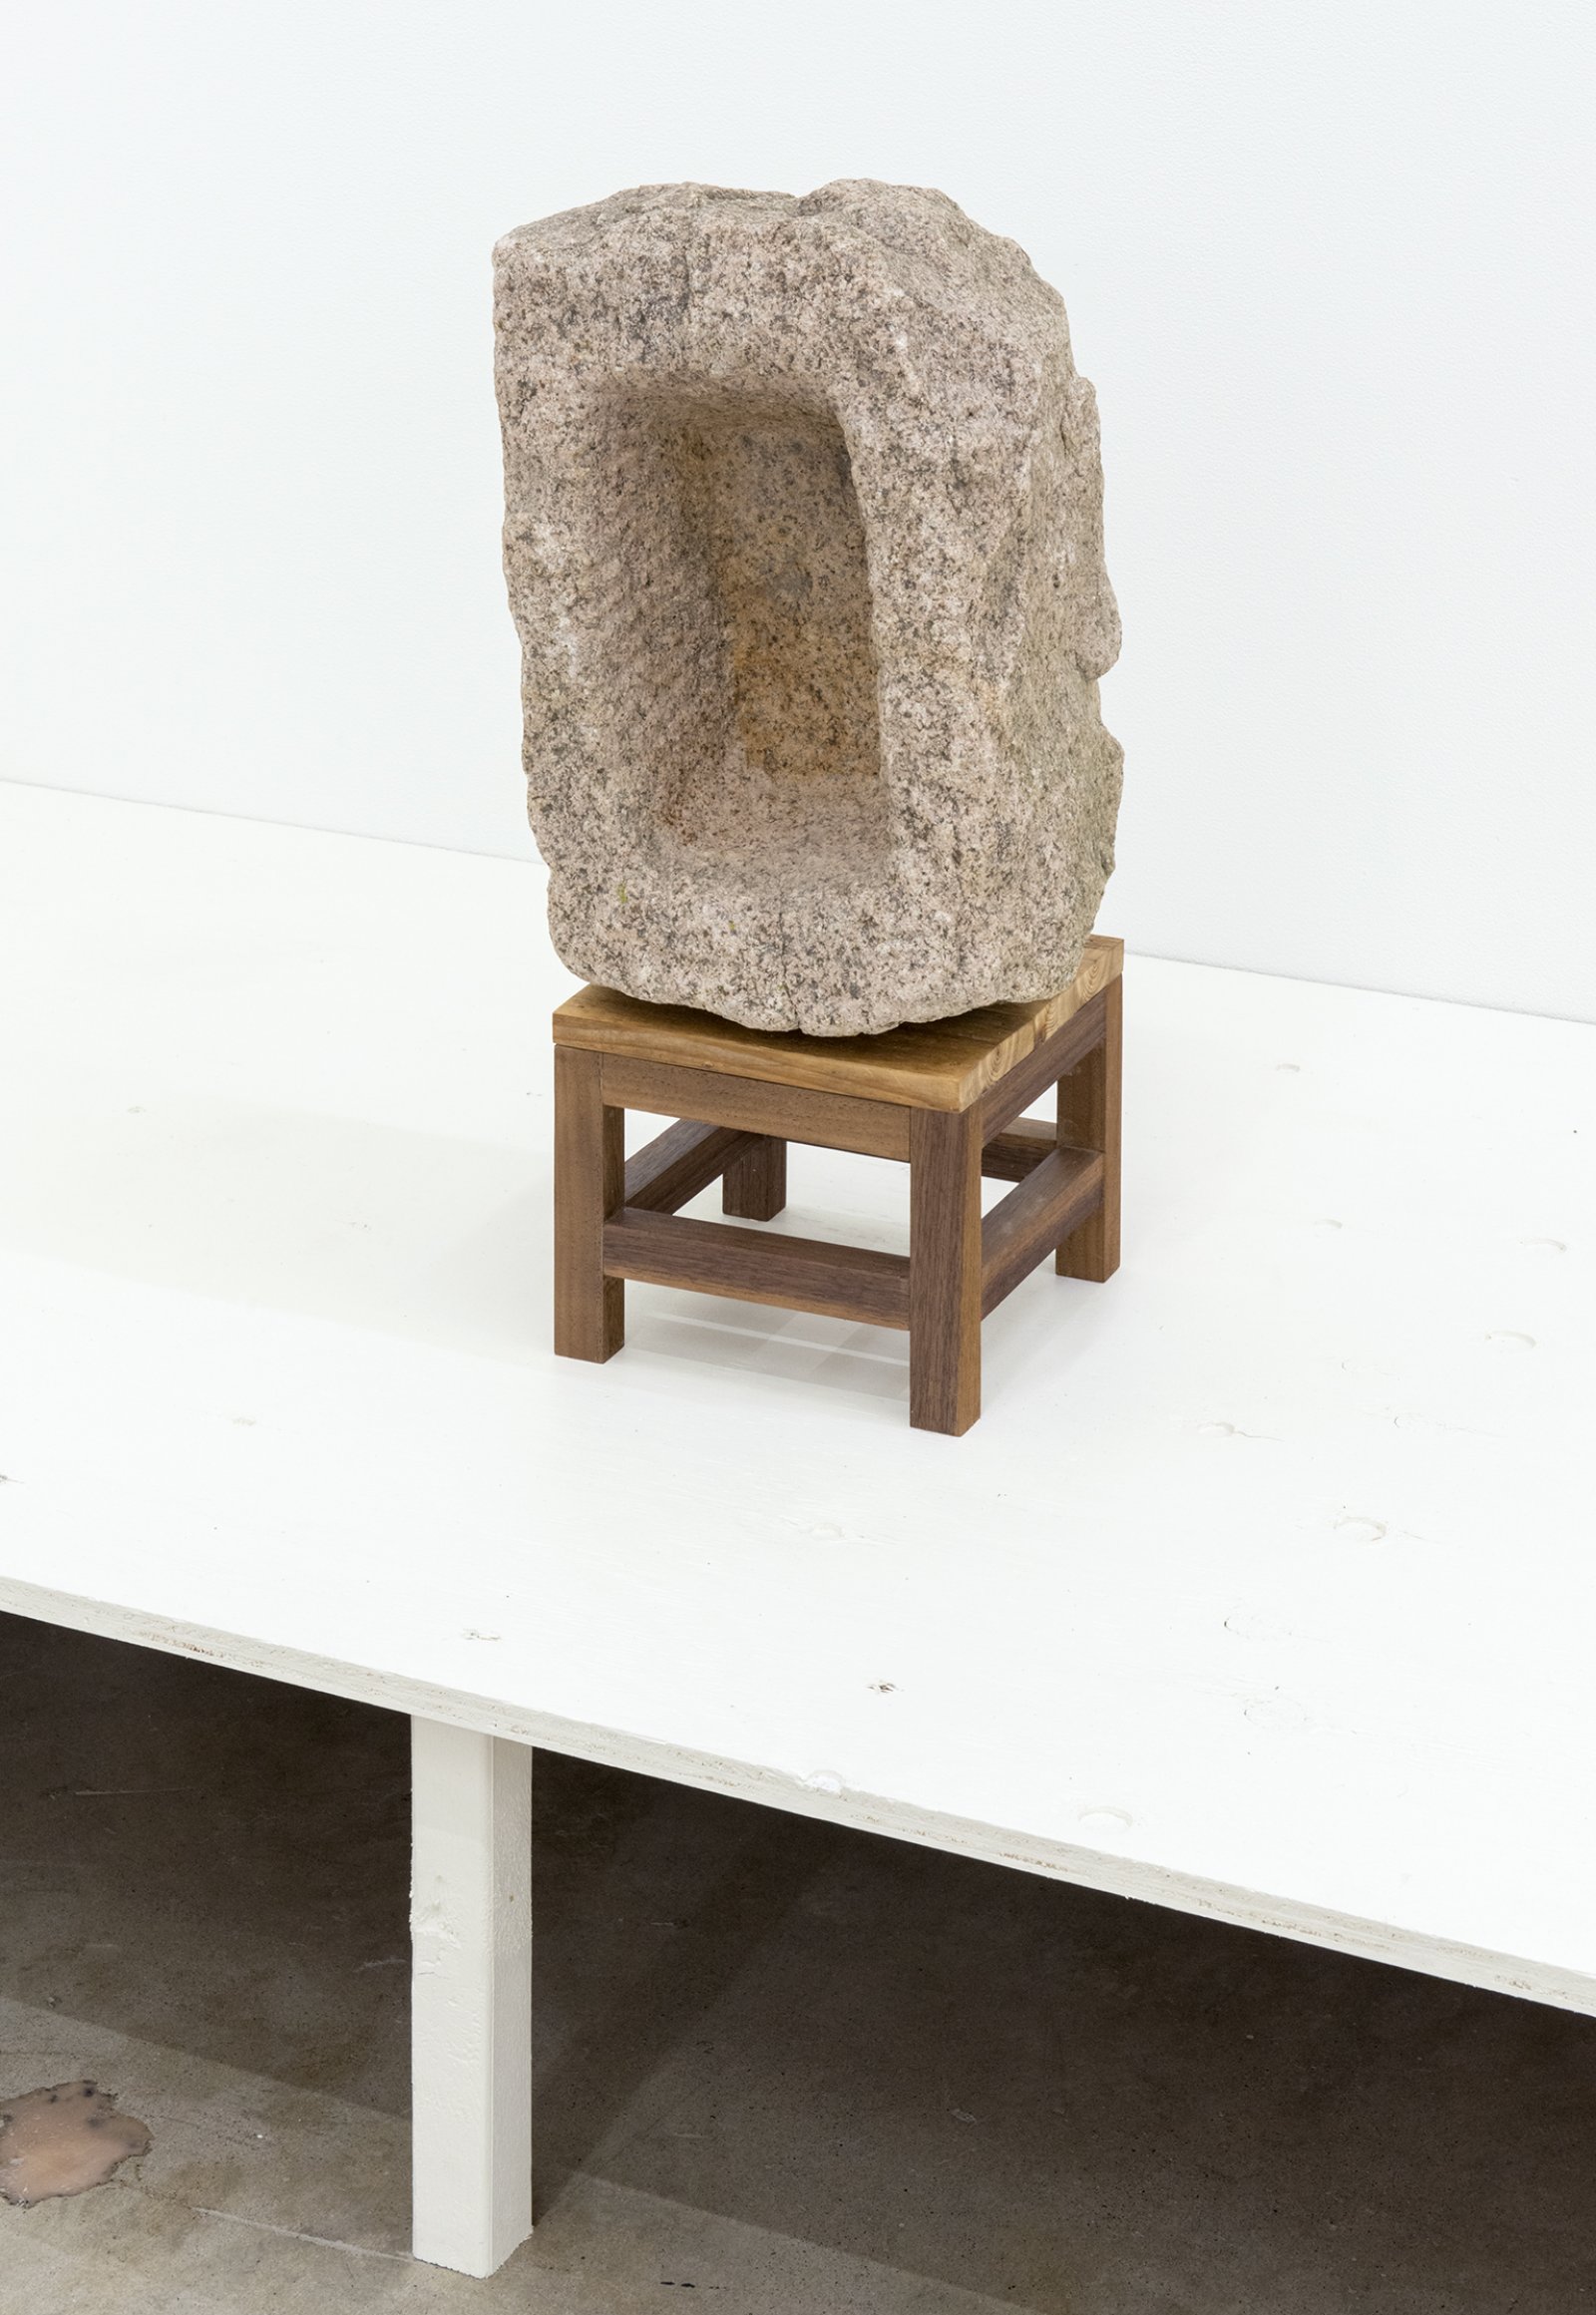 Gareth Moore, Antique Stone 03, 2013, hand carved antique granite, wood, 21 x 11 x 8 in. (53 x 27 x 20 cm) by Ashes Withyman